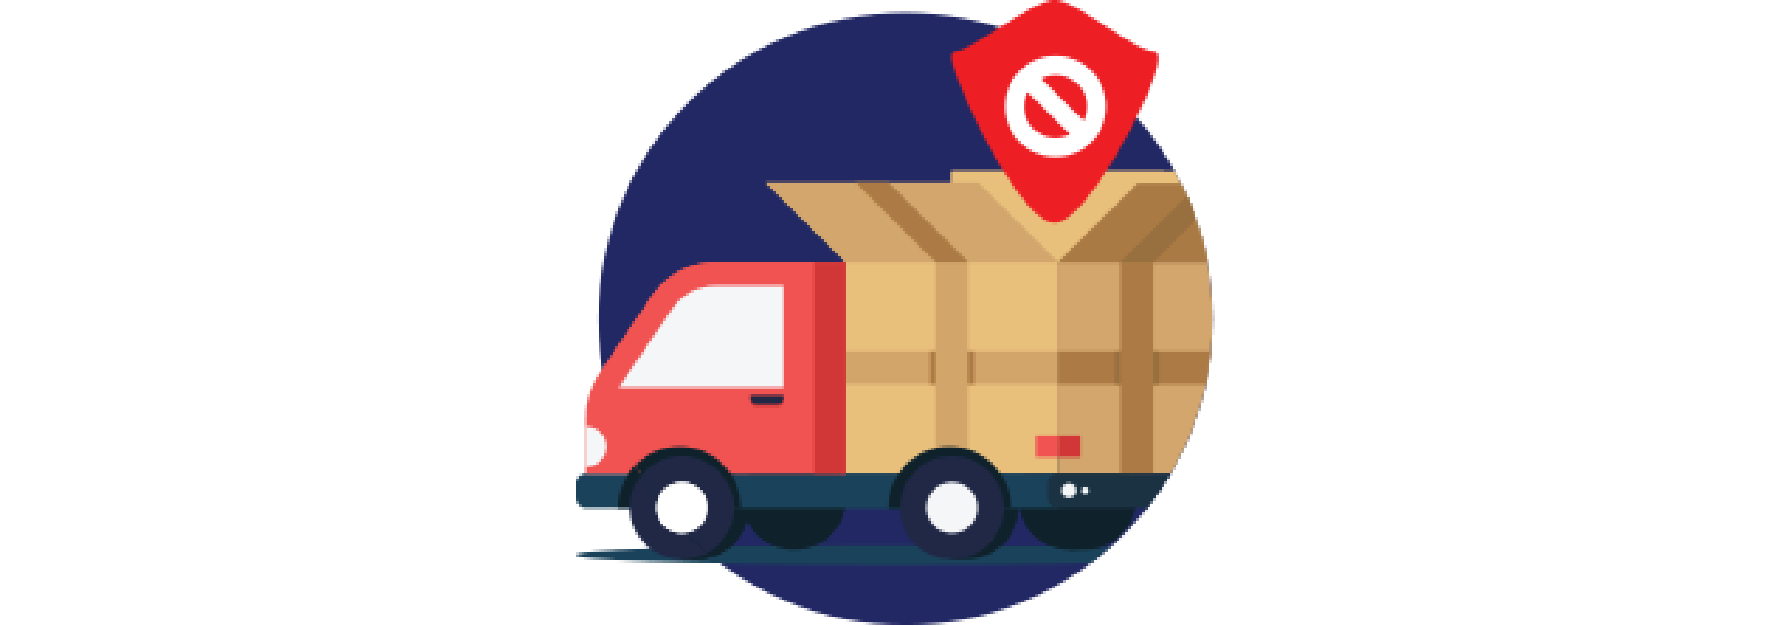 Magento 2 Shipping Restrictions extension by Magedelight optimizing eCommerce customer experience